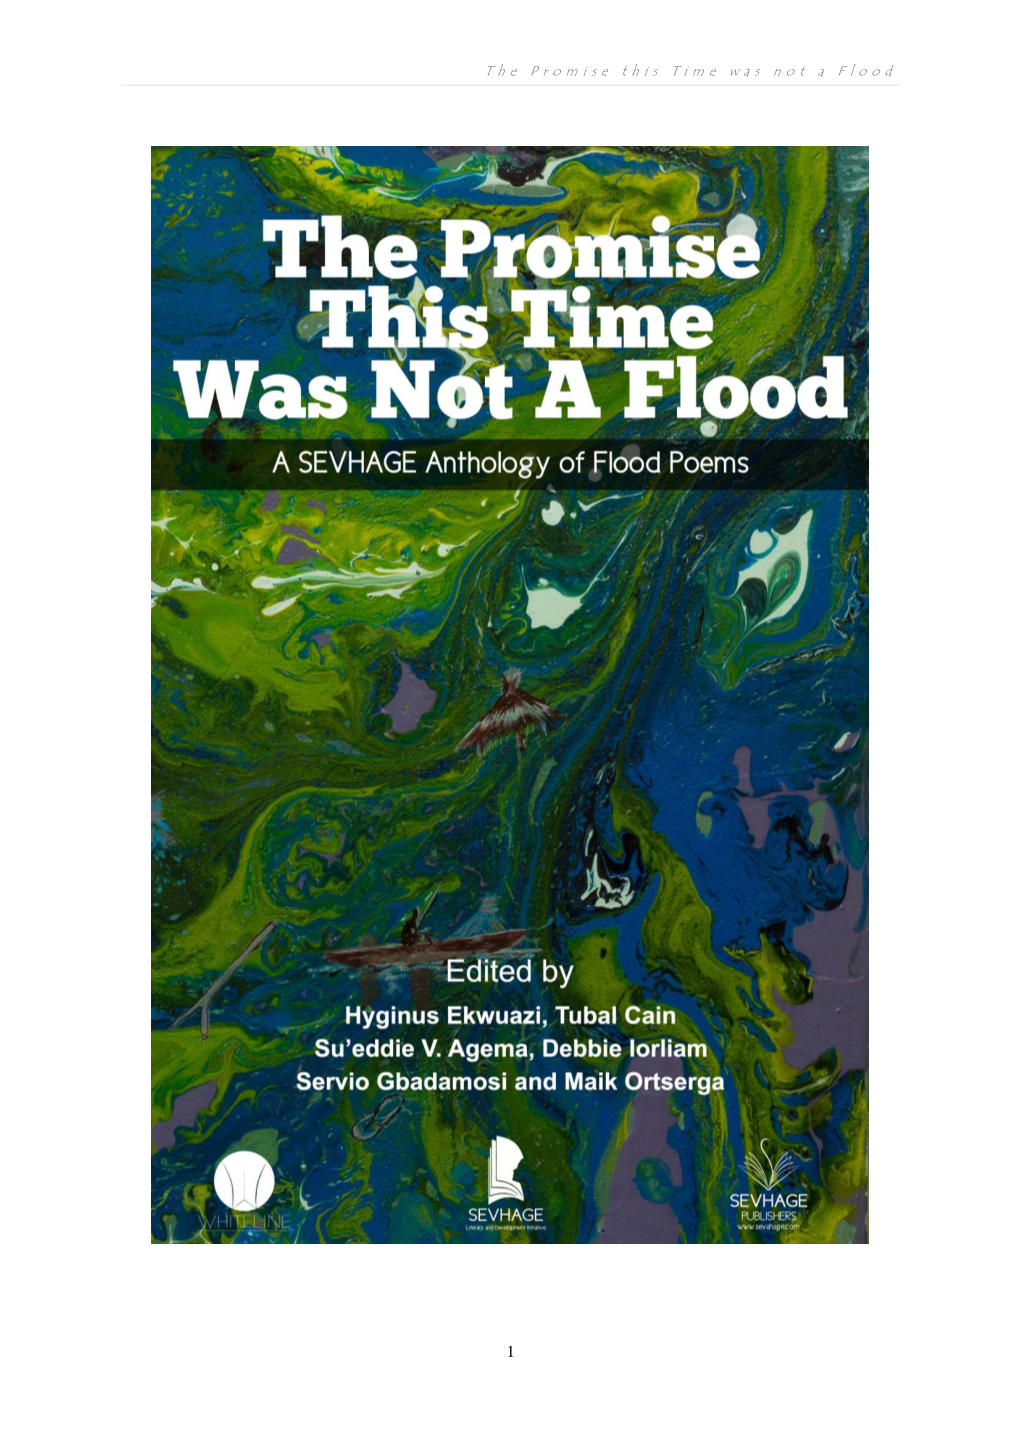 The Promise This Time Was Not a Flood